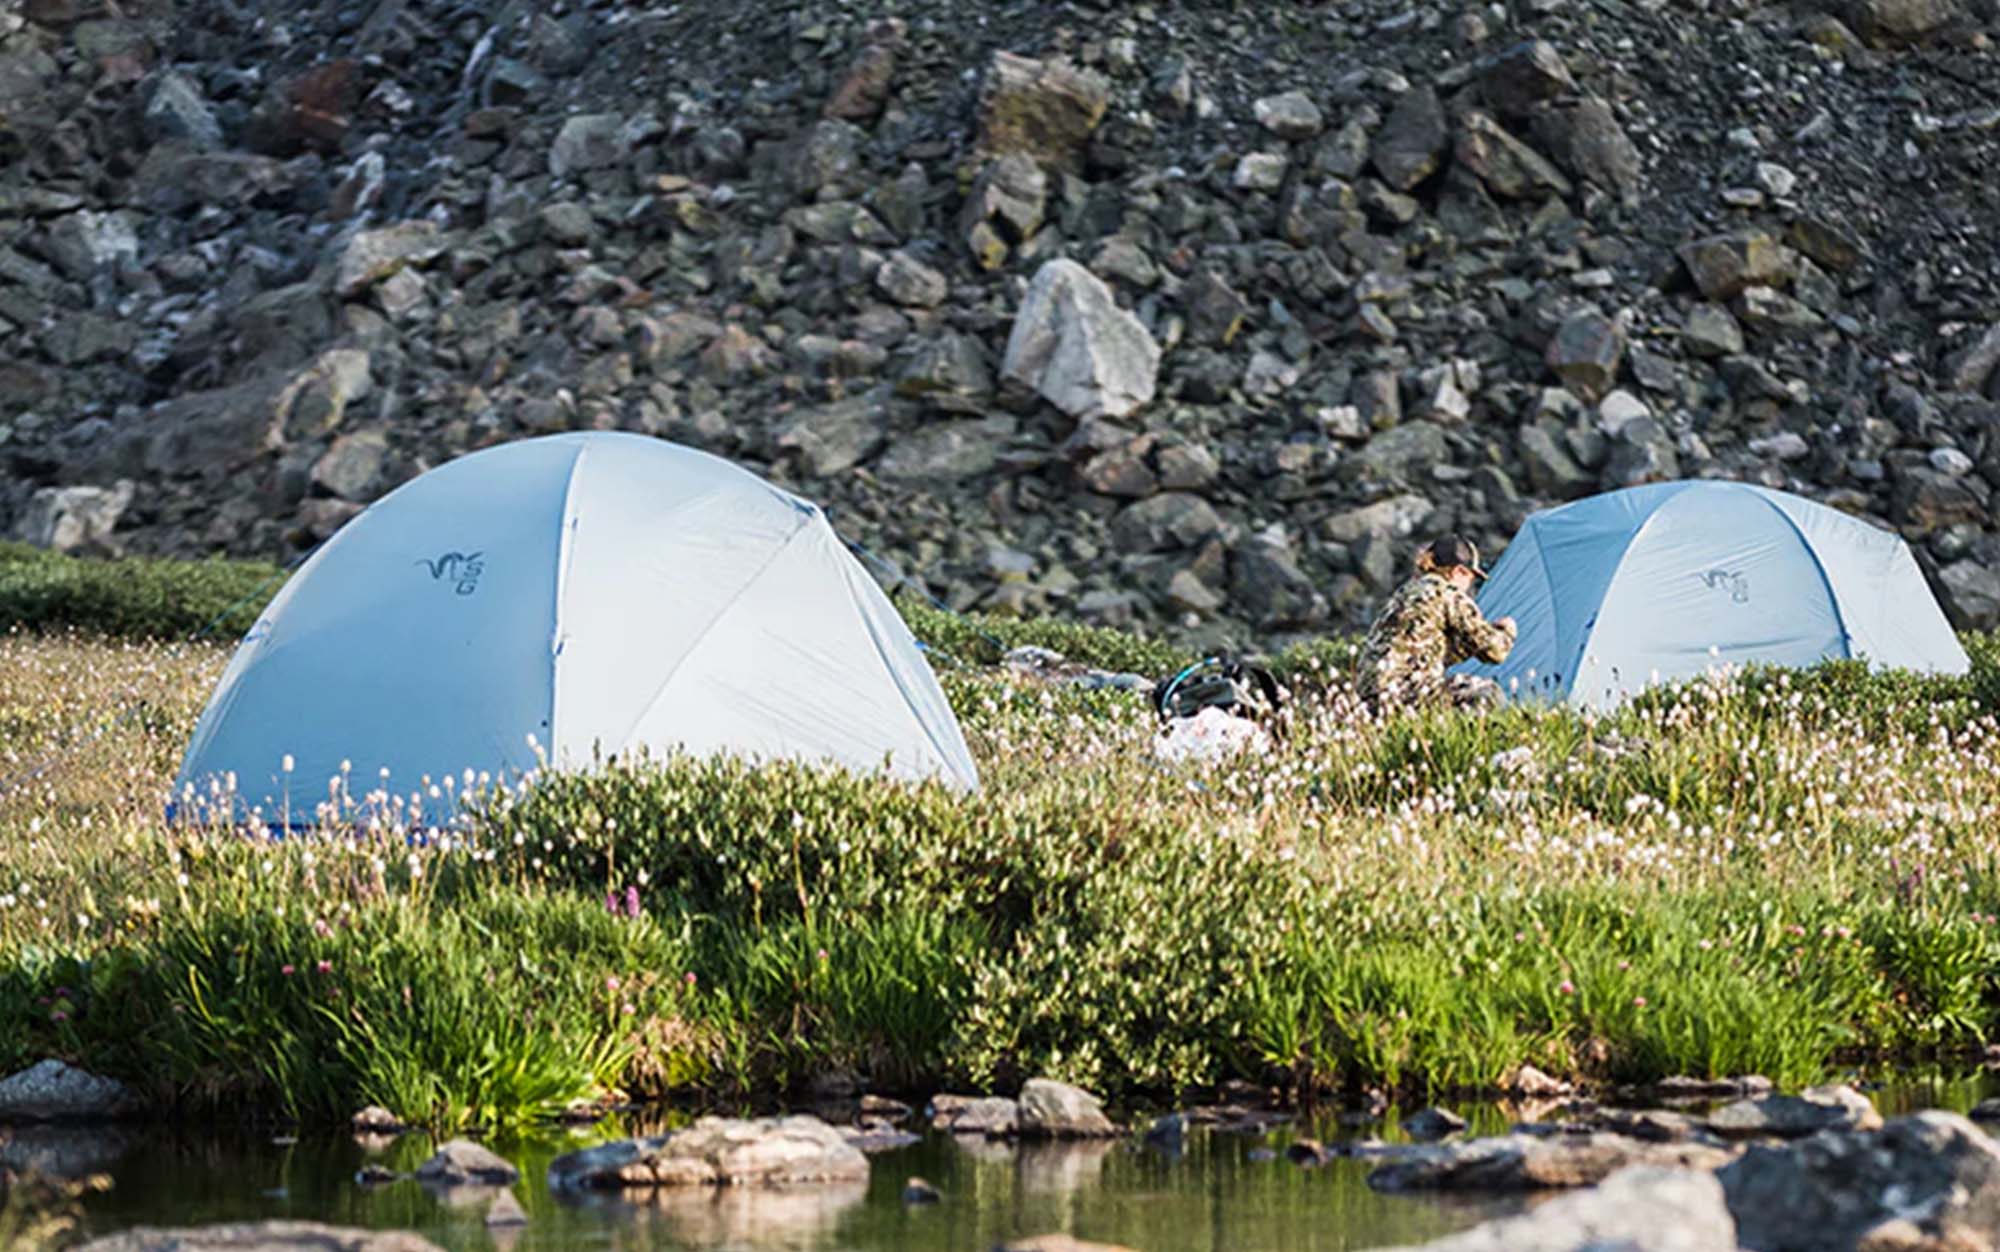 Stone Glacier is one of the best tent brands